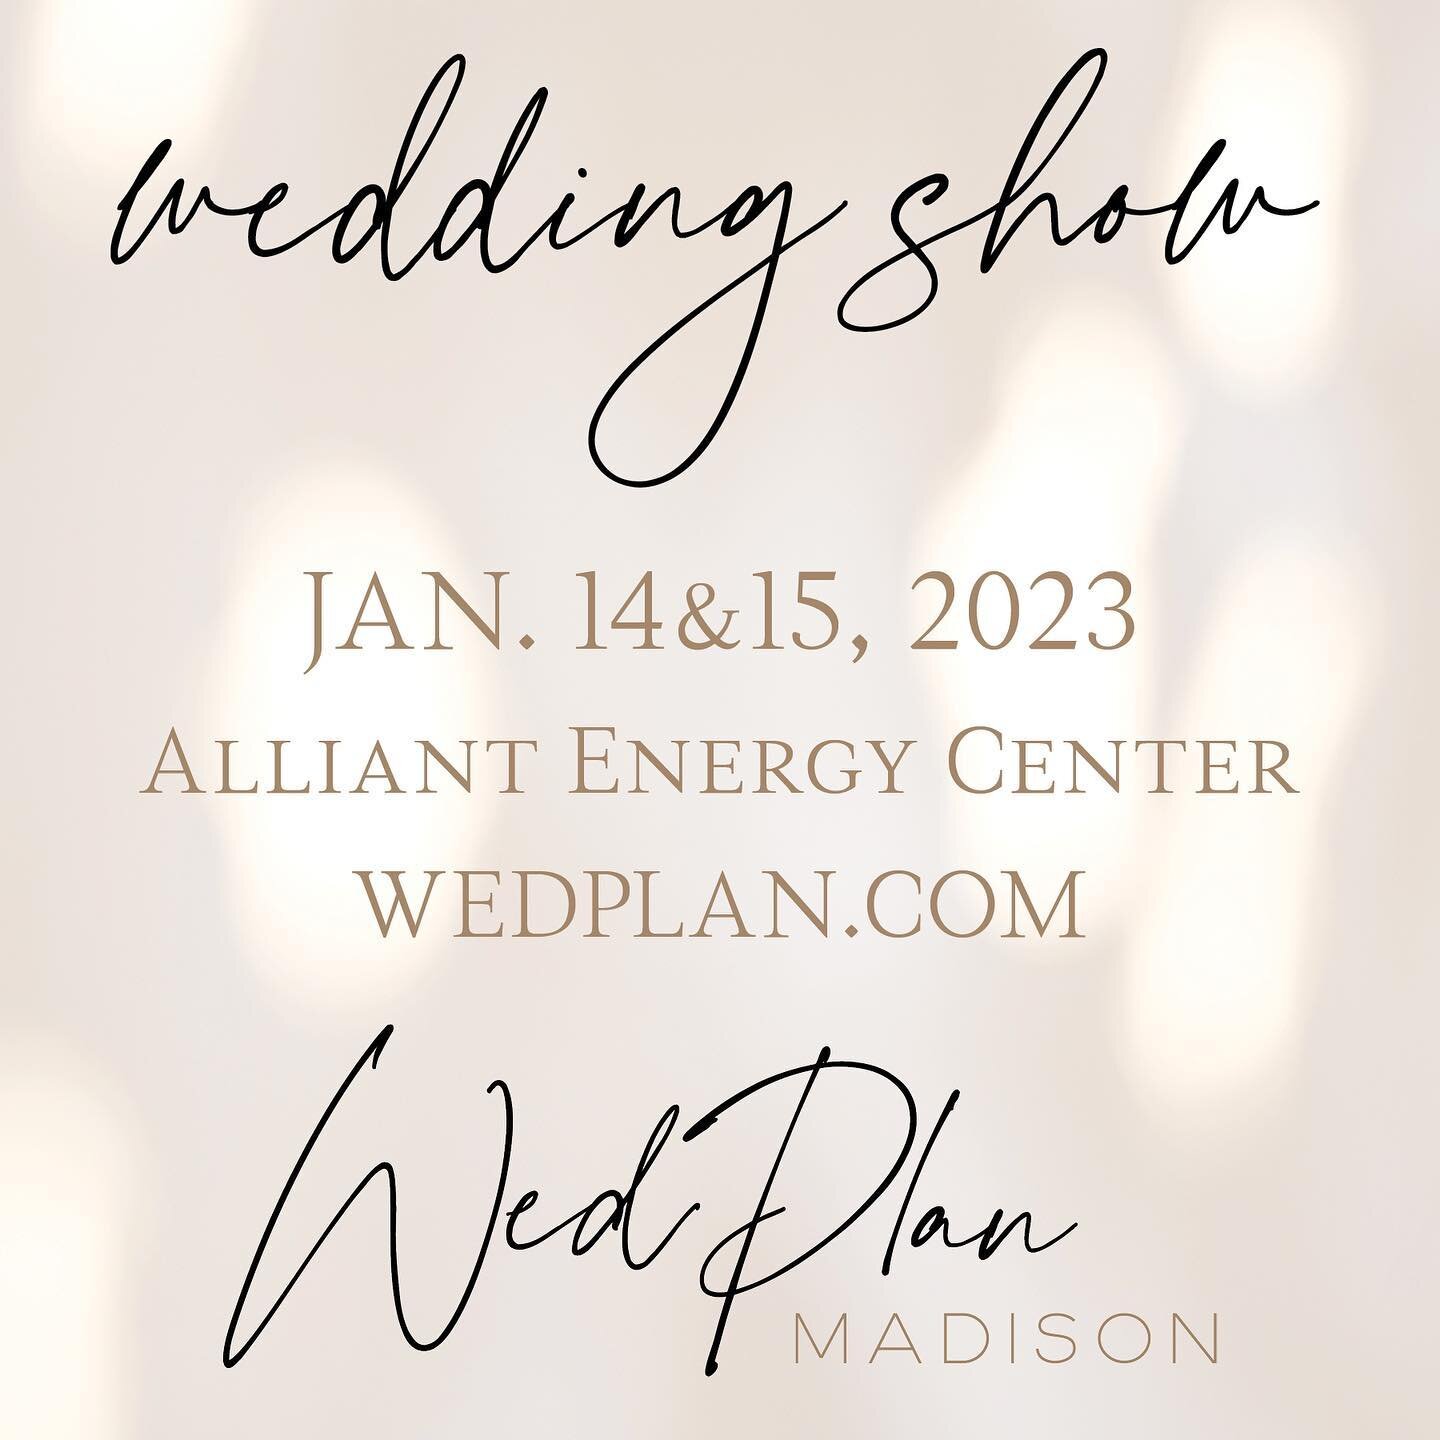 🌞Find us at the Wedding Show this weekend, Booth 906🌞
Feeling pretty excited to introduce Fest to Madison! 

#weddinginspiration #weddingplanning #engaged #isaidyes #madisonwi #wisconsin #invitations #weddingdetails #party